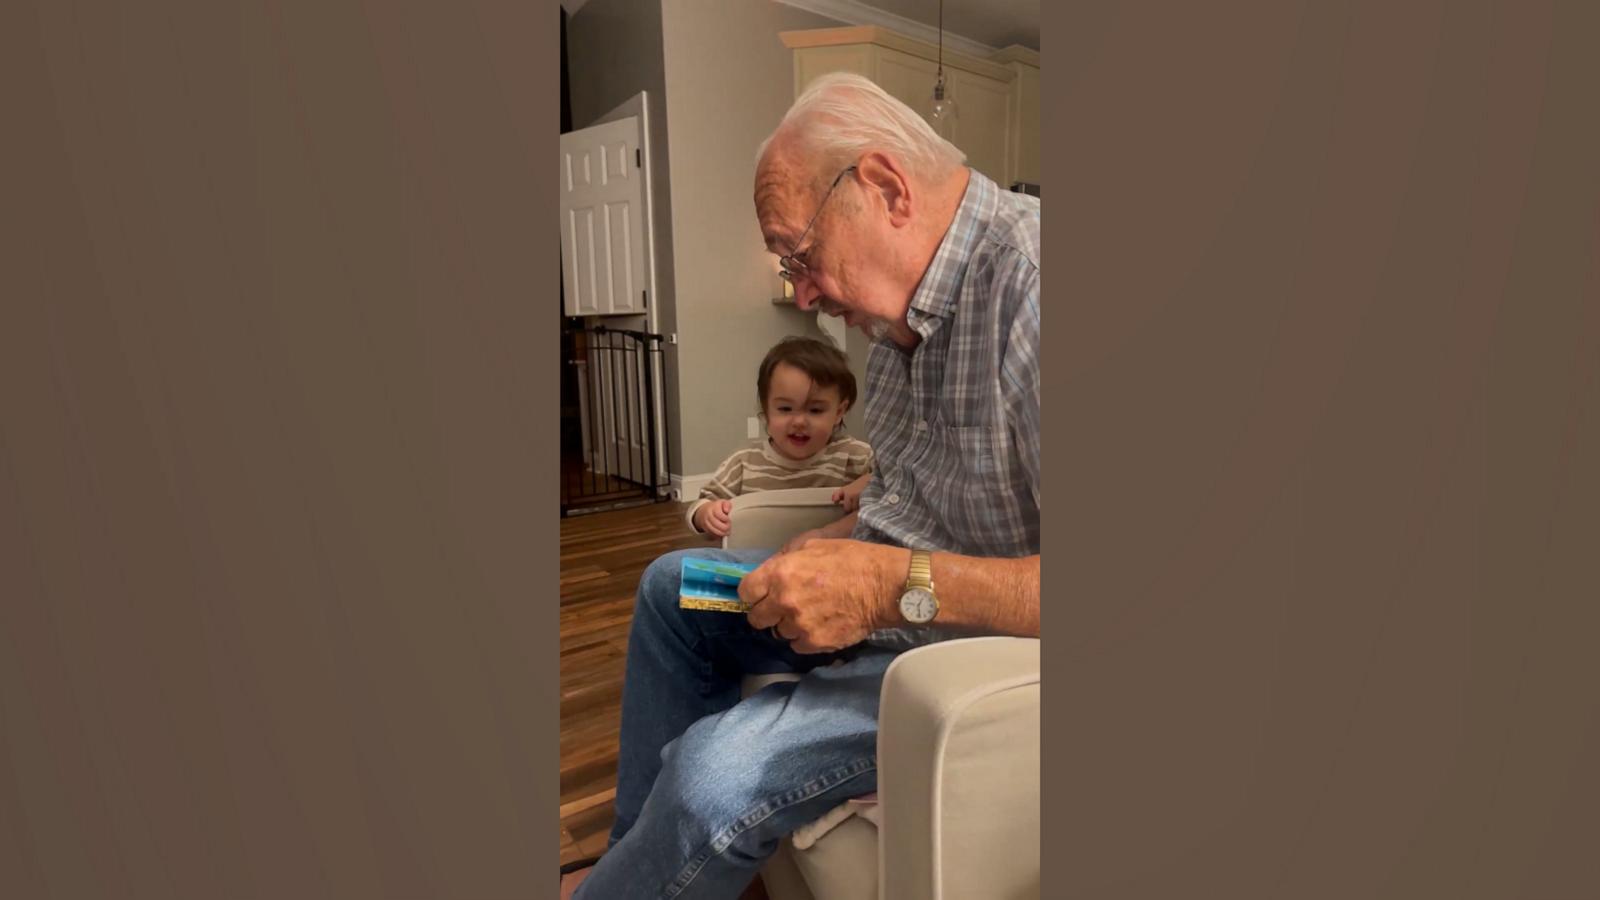 VIDEO: Great-grandpa reads 'Baby Shark' to great-granddaughter without knowing the song